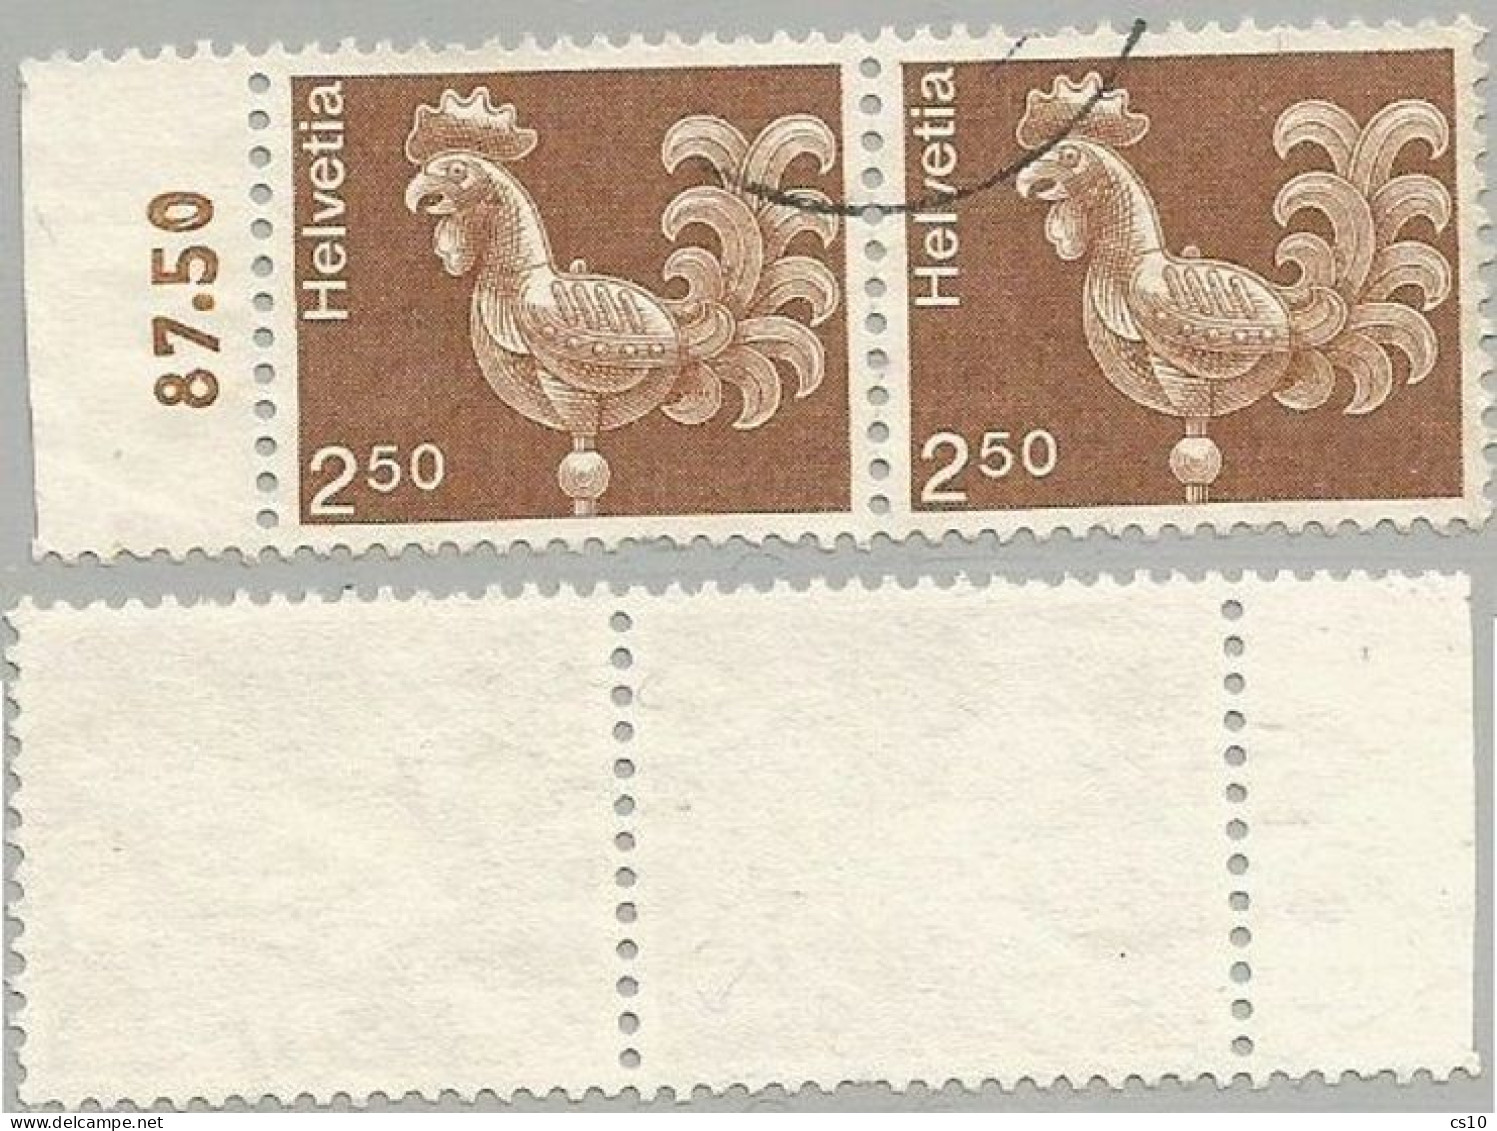 Suisse 1975 Artworks Wheatercock FS.2,50 - Scarce Variety NON FLUO PAPER - #2 Pcs In Horiz. Pair With Sheet Margin - Usati